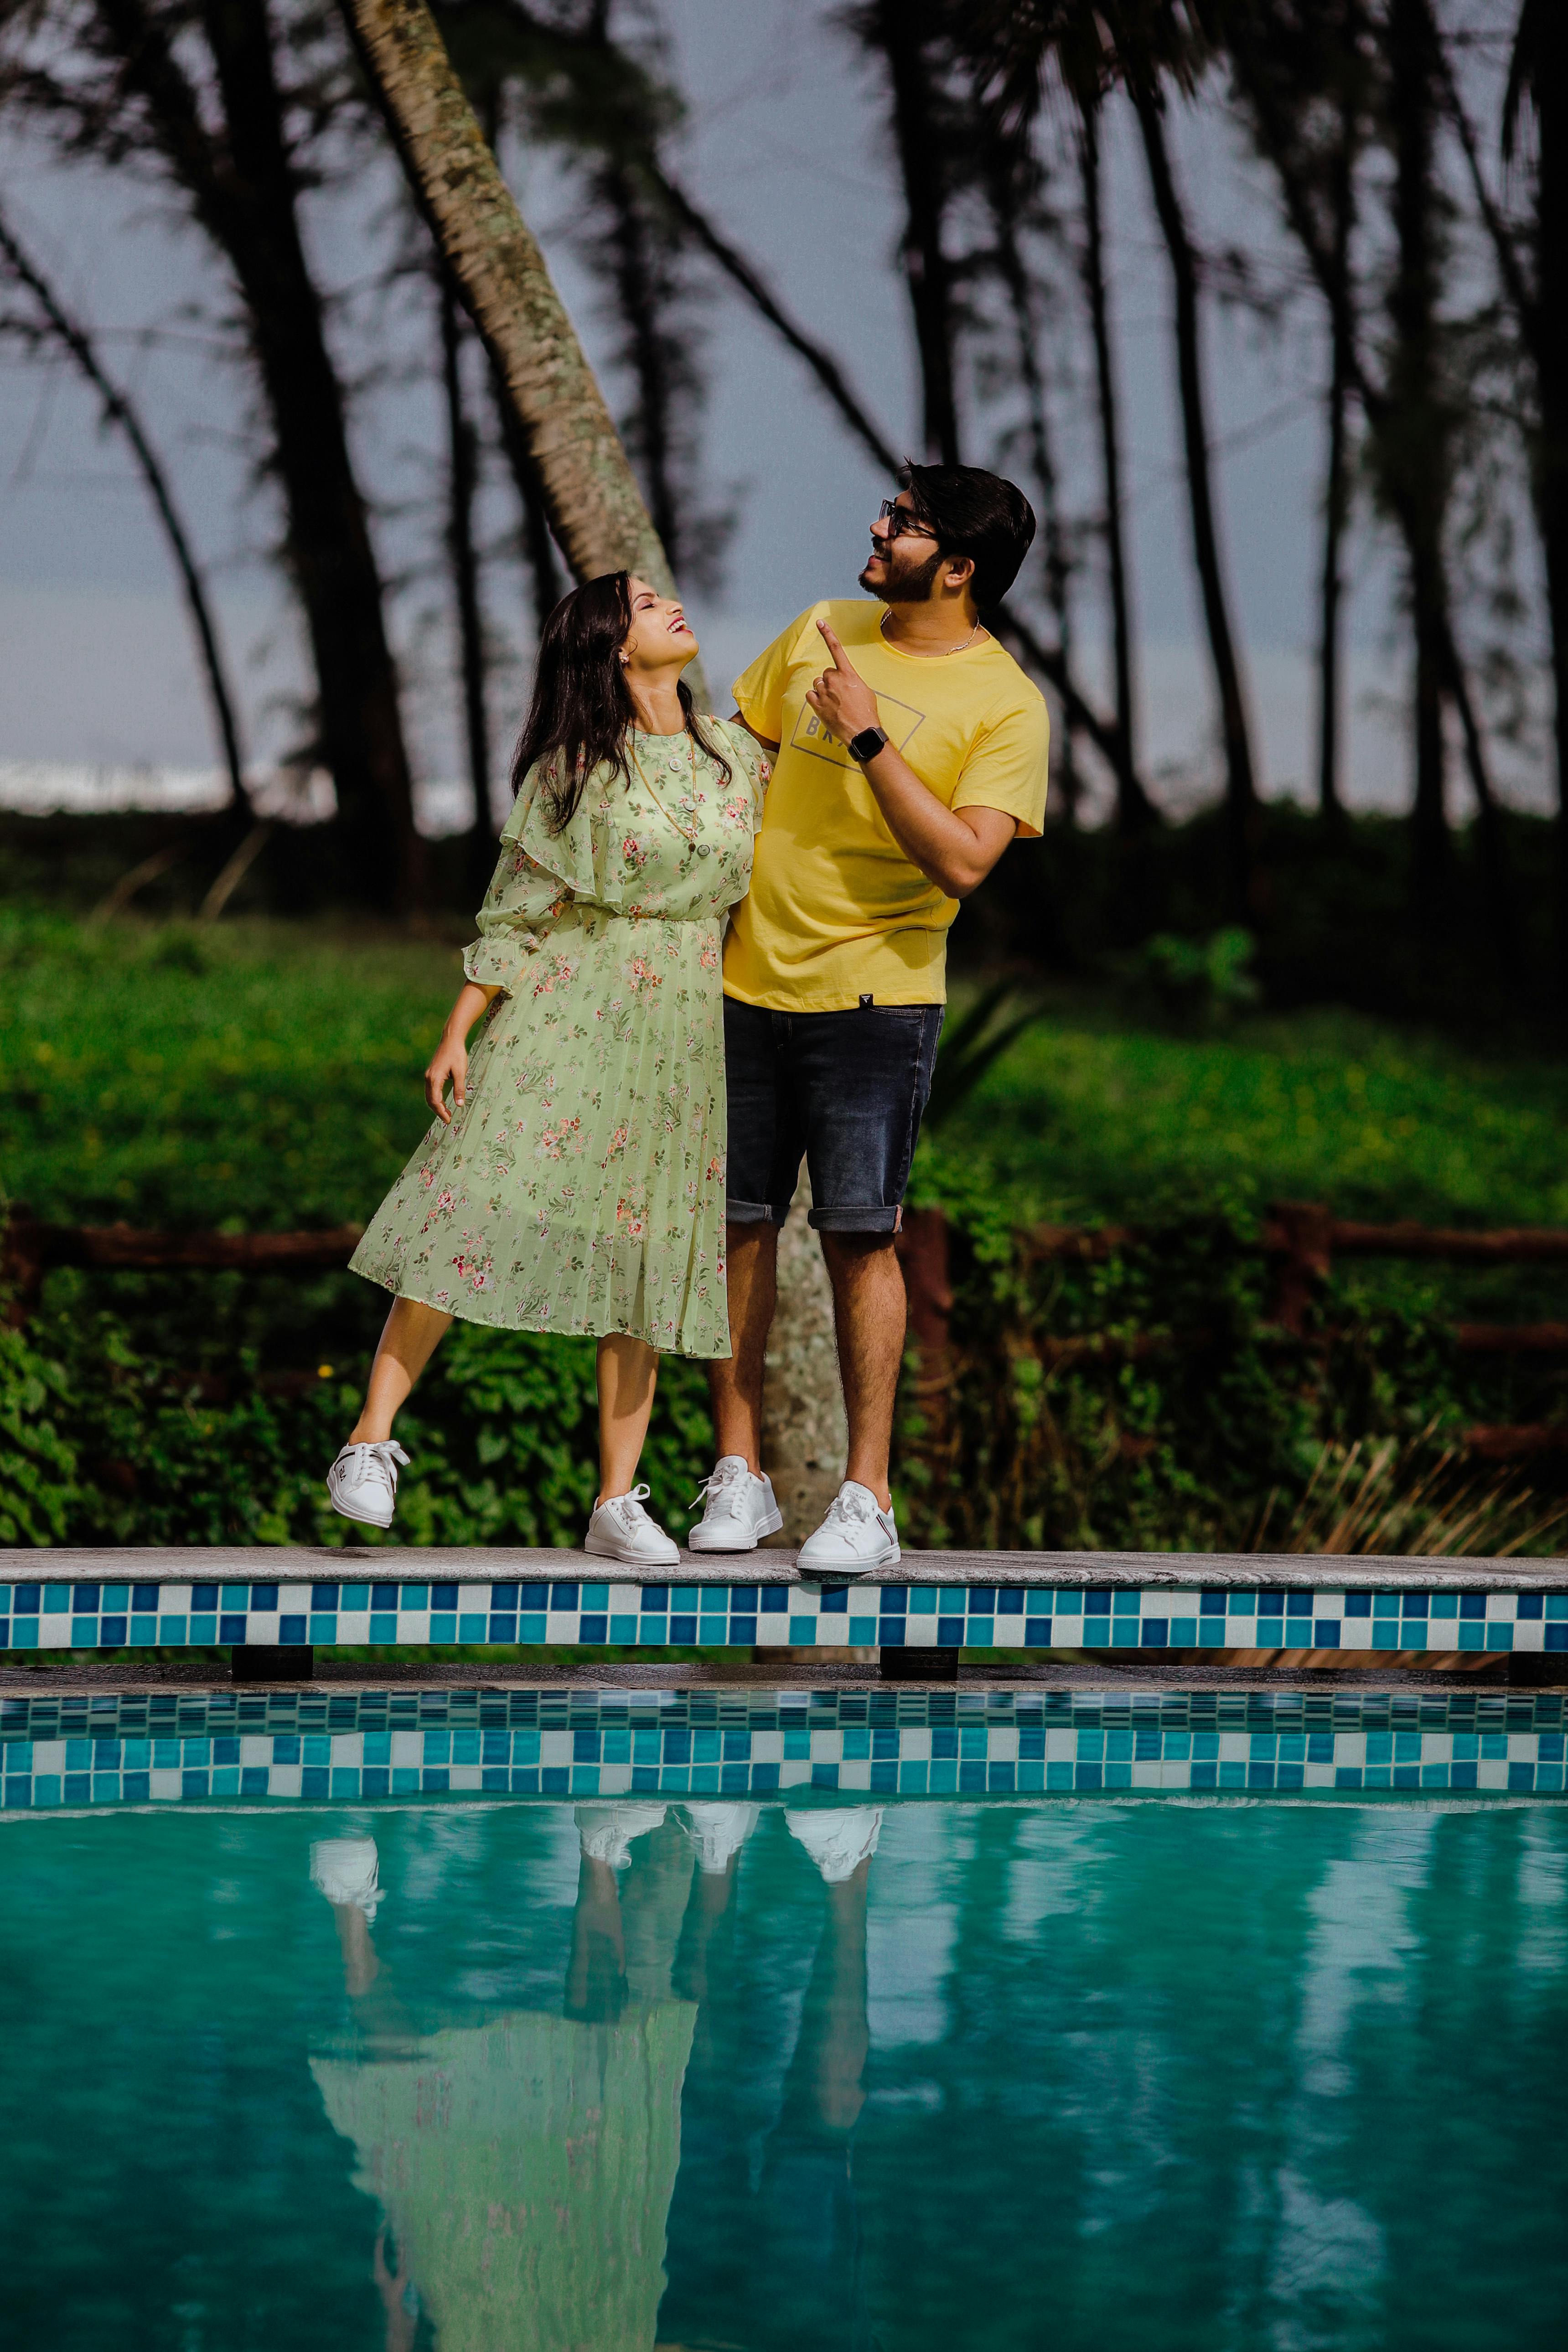 A Couple Sitting by a Pool · Free Stock Photo